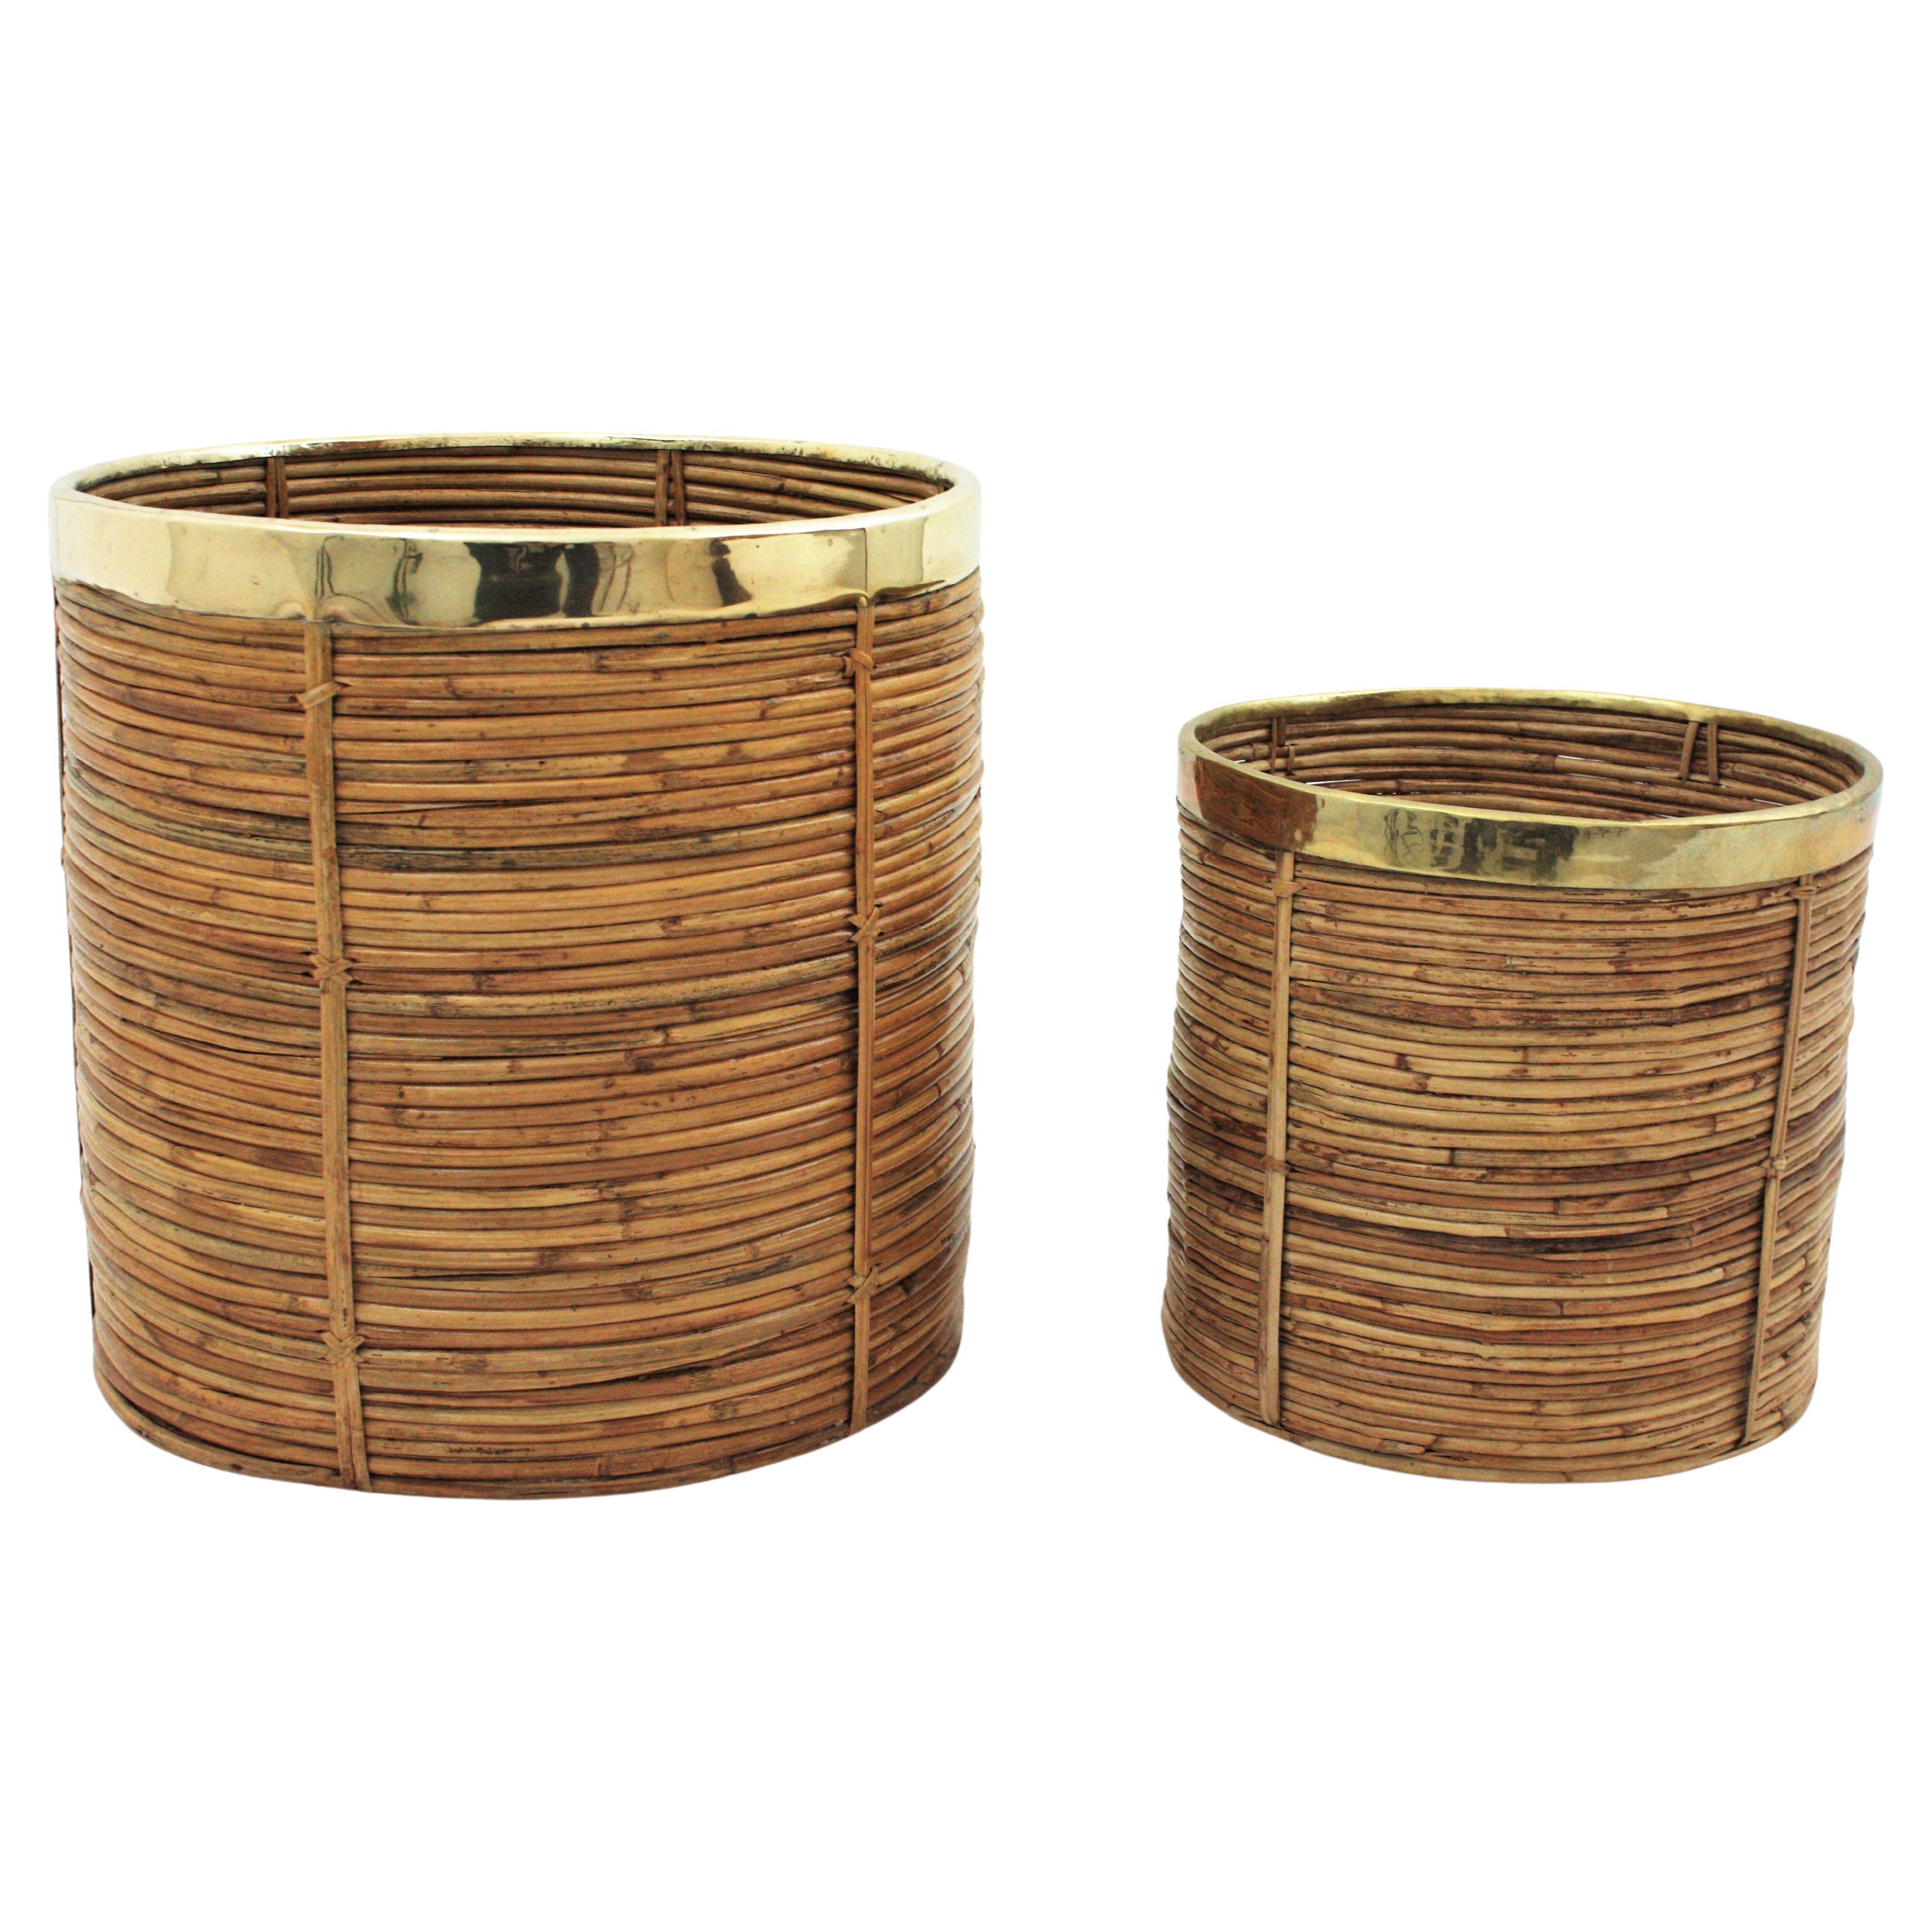 Beautiful set of two Mid-Century Modern decorative brass and rattan large planters or baskets. Handcrafted in Italy, 1970s.
Round shape with gilded brass rim. Inspired on Gabriella Crespi designs.
Both are large planters, one of them is a smaller